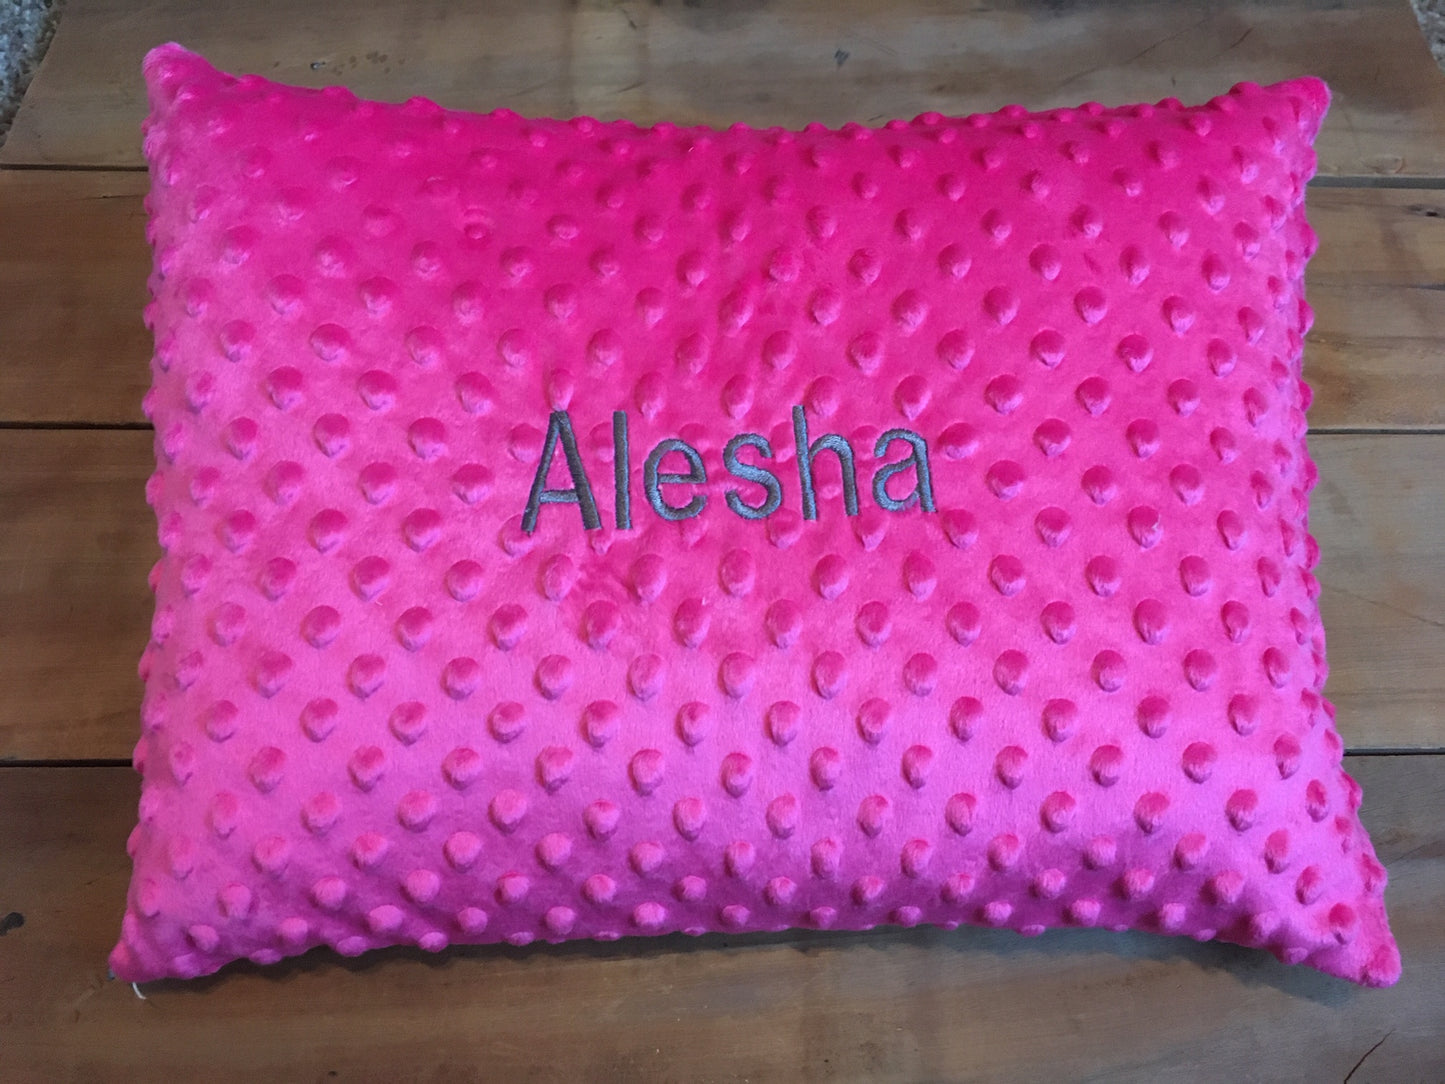 pink minky pillow cover shown with embroidered name in dark gray thread